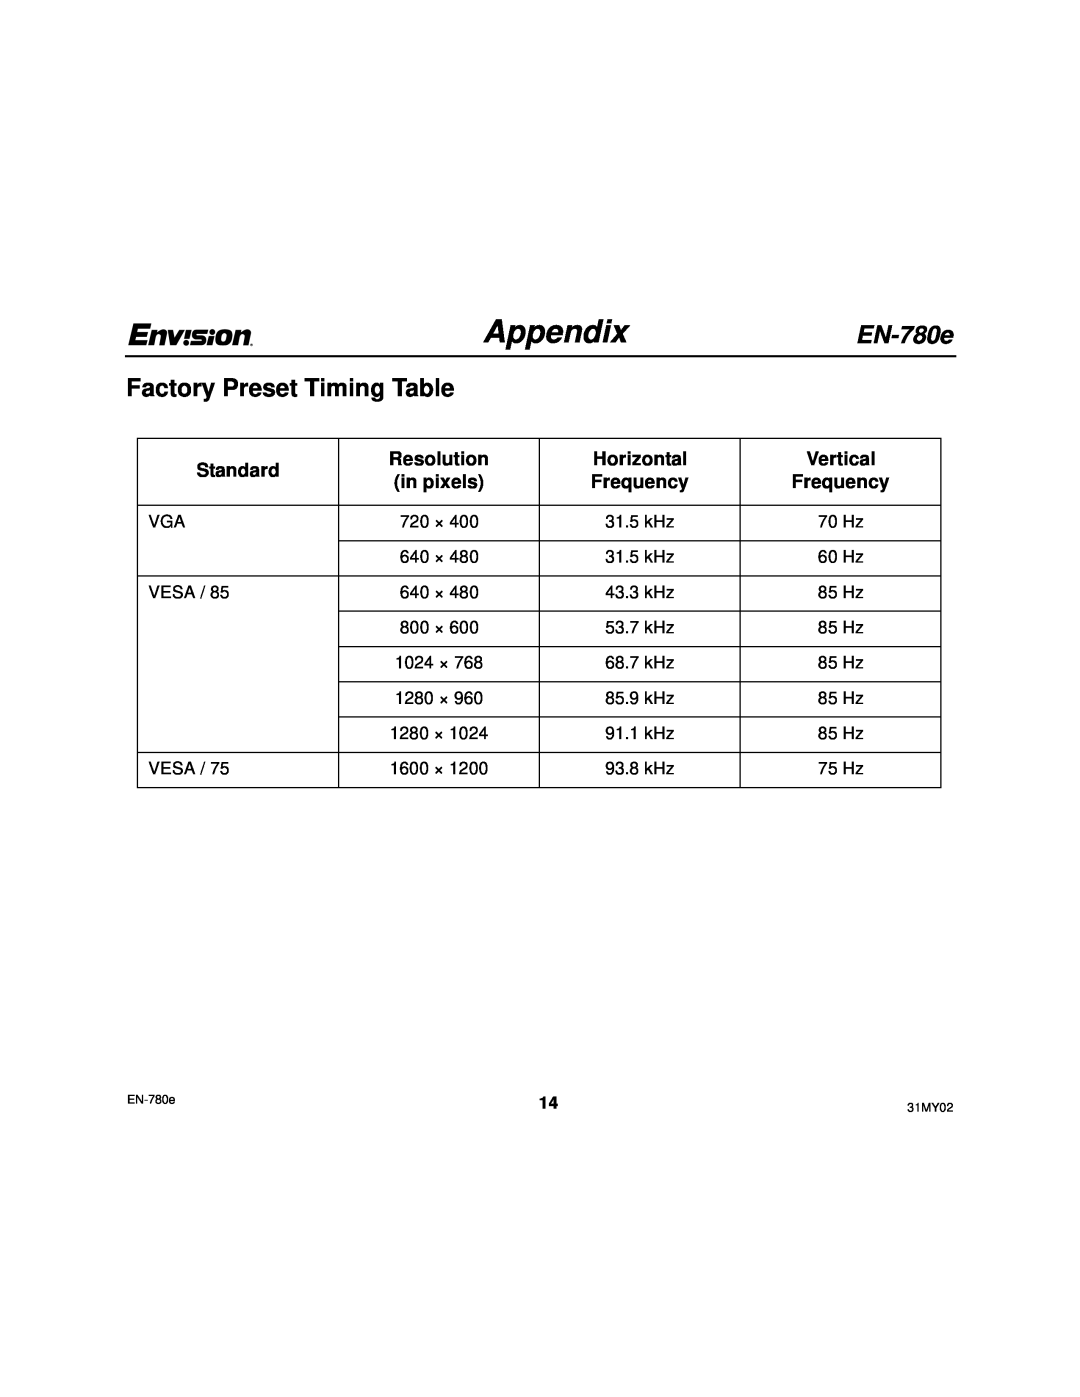 Envision Peripherals EN-780e_31MY02 Factory Preset Timing Table, Standard, Resolution, Horizontal, Vertical, in pixels 